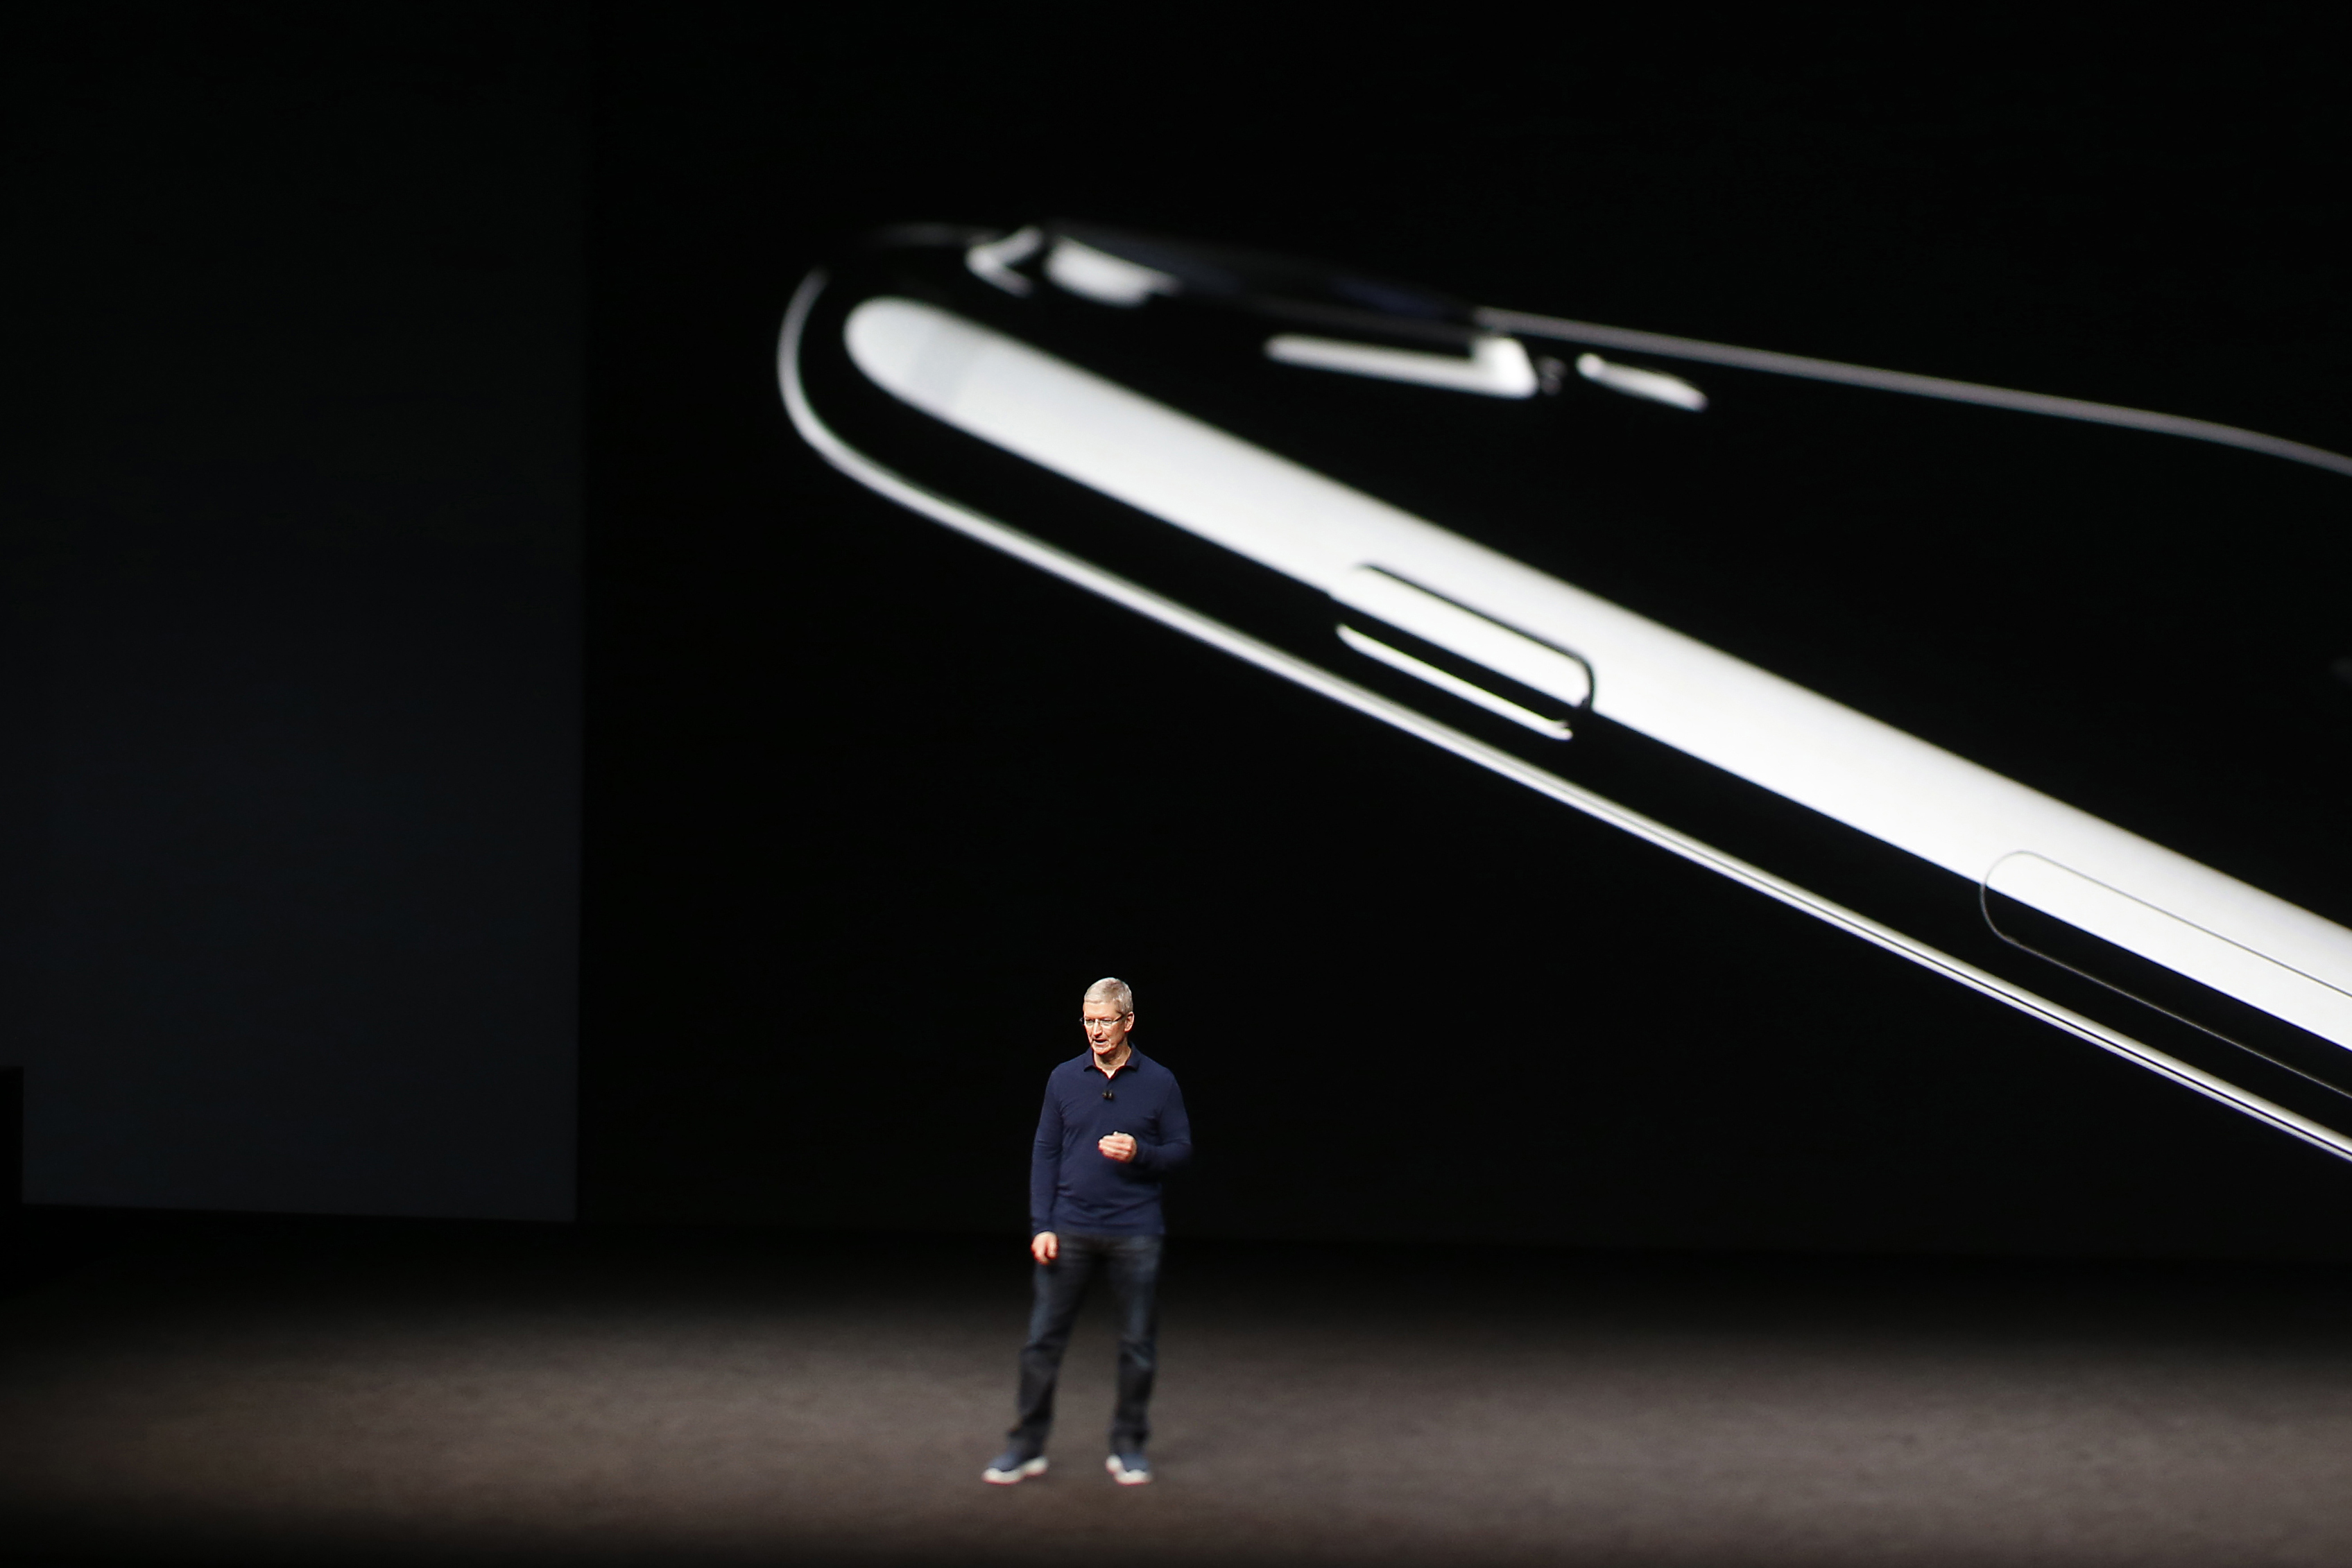 Apple CEO Tim Cook speaks on stage during a launch event on September 7, 2016 in San Francisco, California. (Stephen Lam—Getty Images)